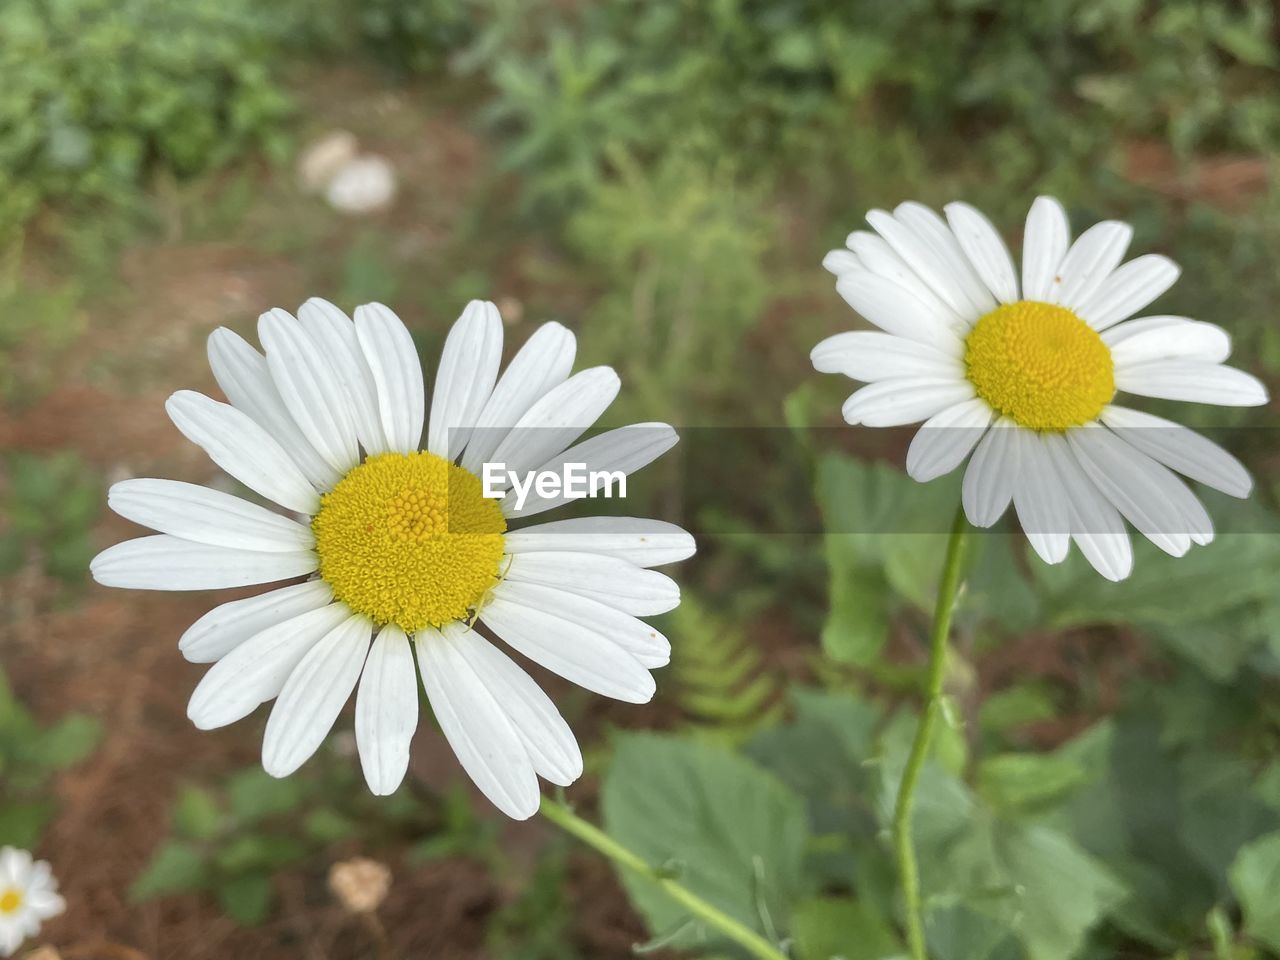 flower, flowering plant, plant, freshness, beauty in nature, flower head, petal, daisy, growth, inflorescence, fragility, nature, close-up, white, pollen, yellow, focus on foreground, no people, botany, springtime, outdoors, blossom, summer, wildflower, day, herb, field, tranquility